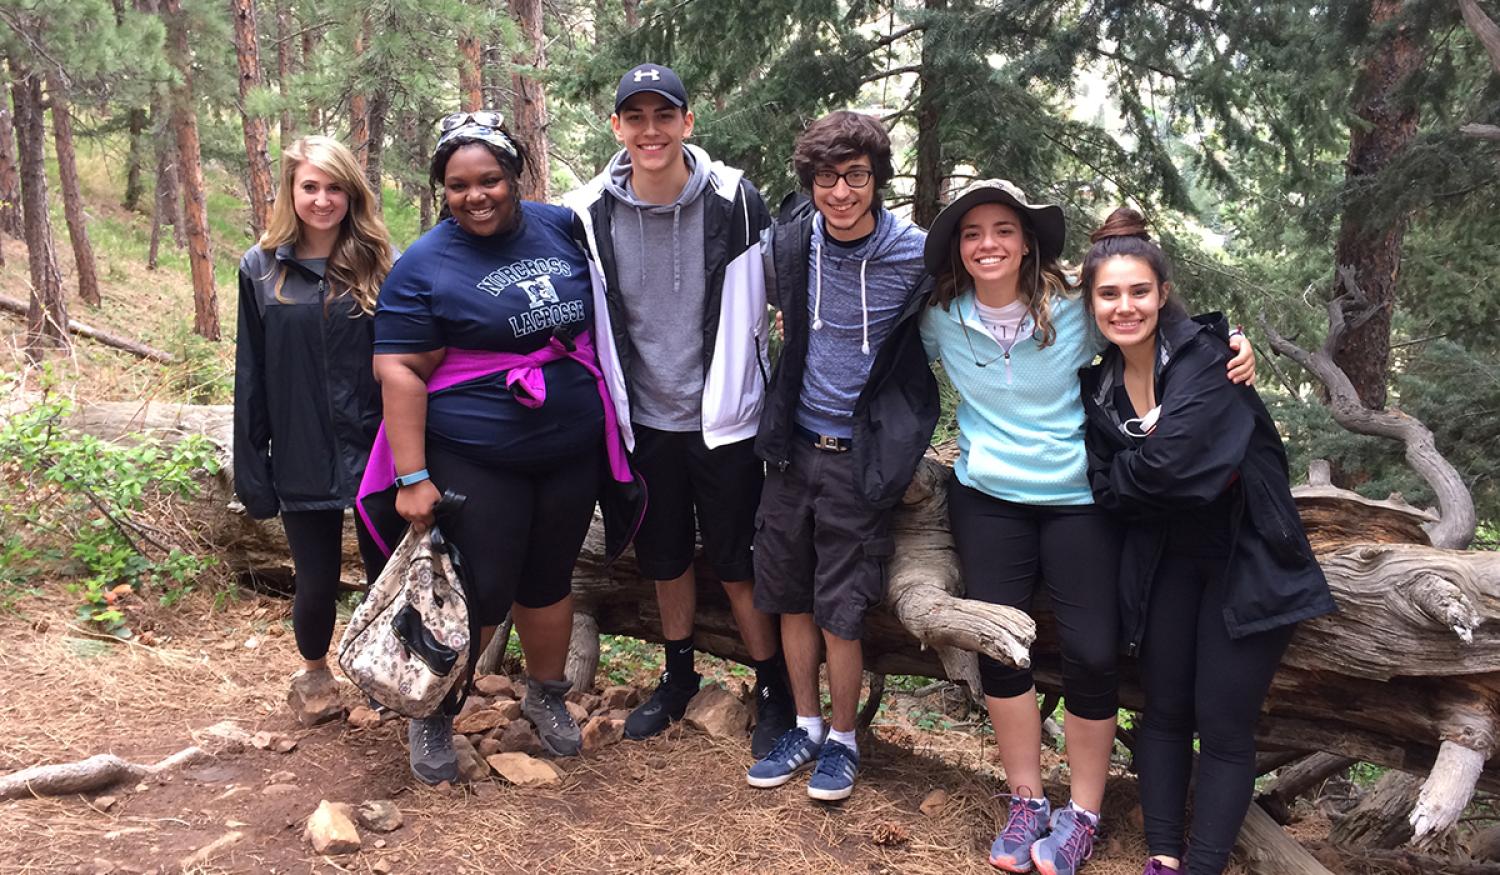 MASPians stopping during their hike for a photo